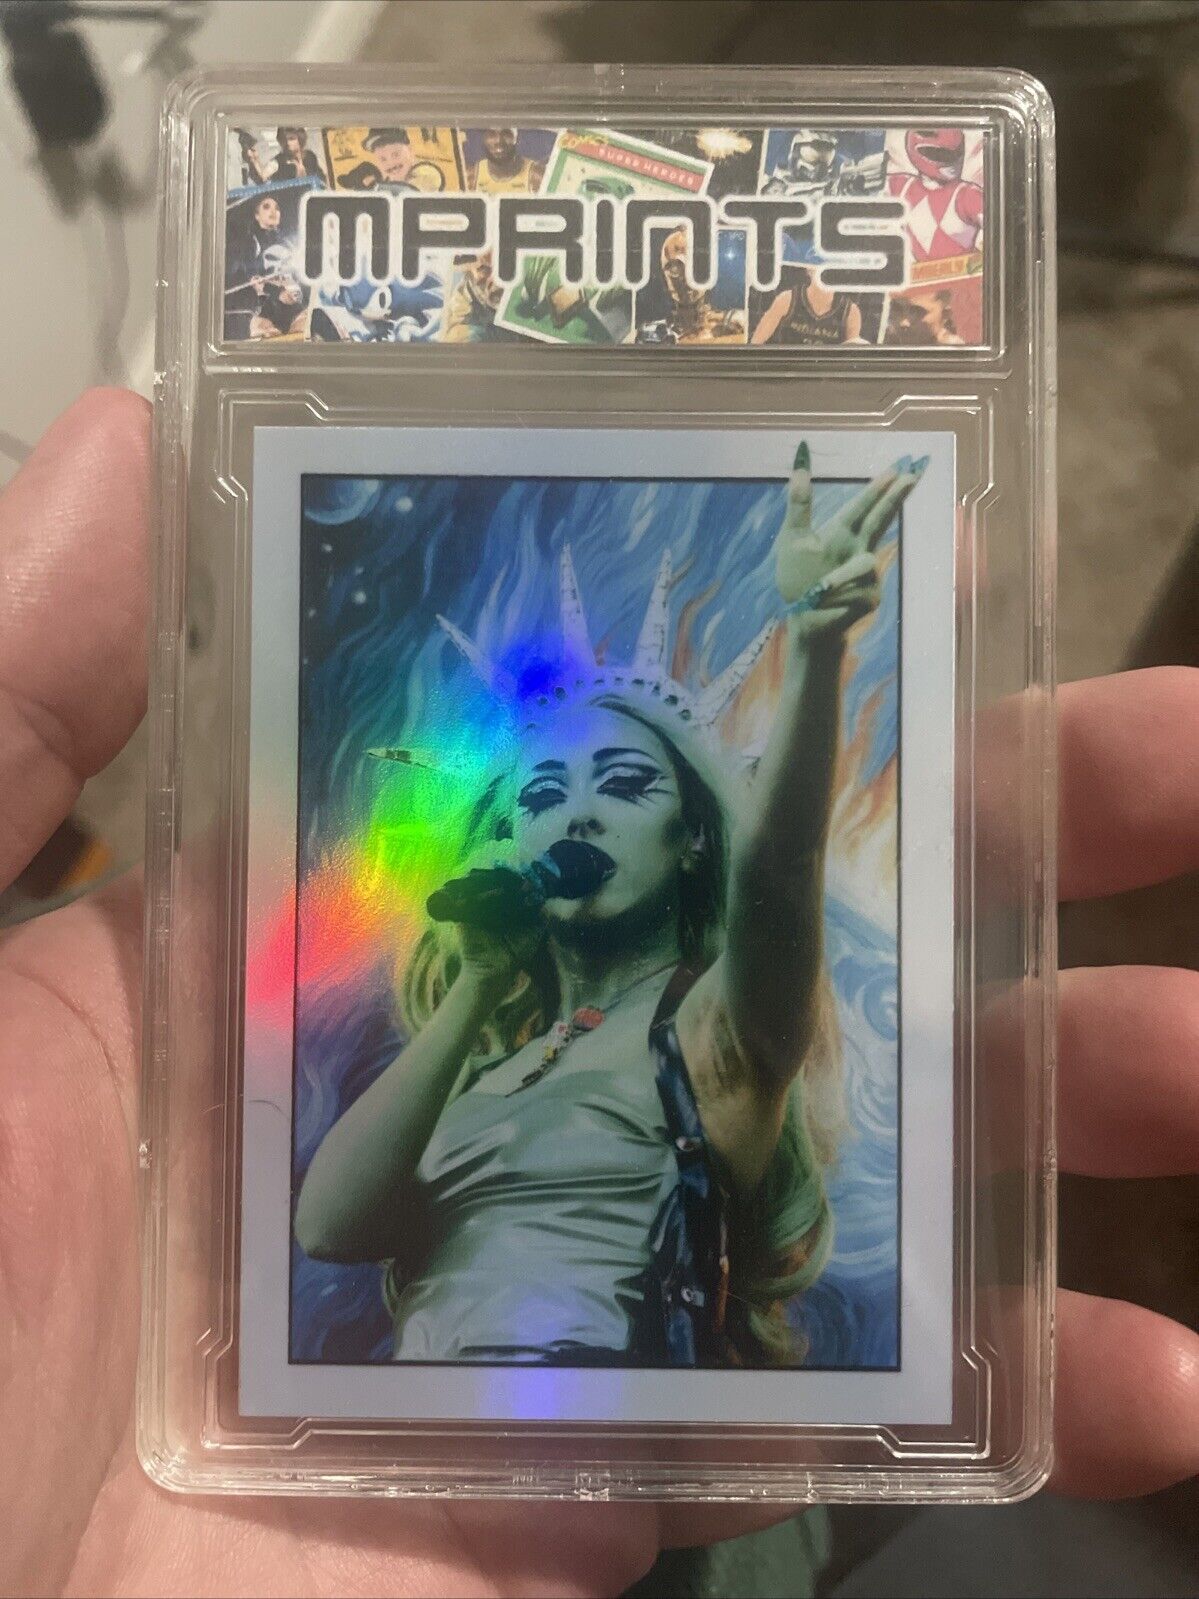 SLABBED Limited Edition Chappell Roan Custom Refractor Trading Card By MPRINTS